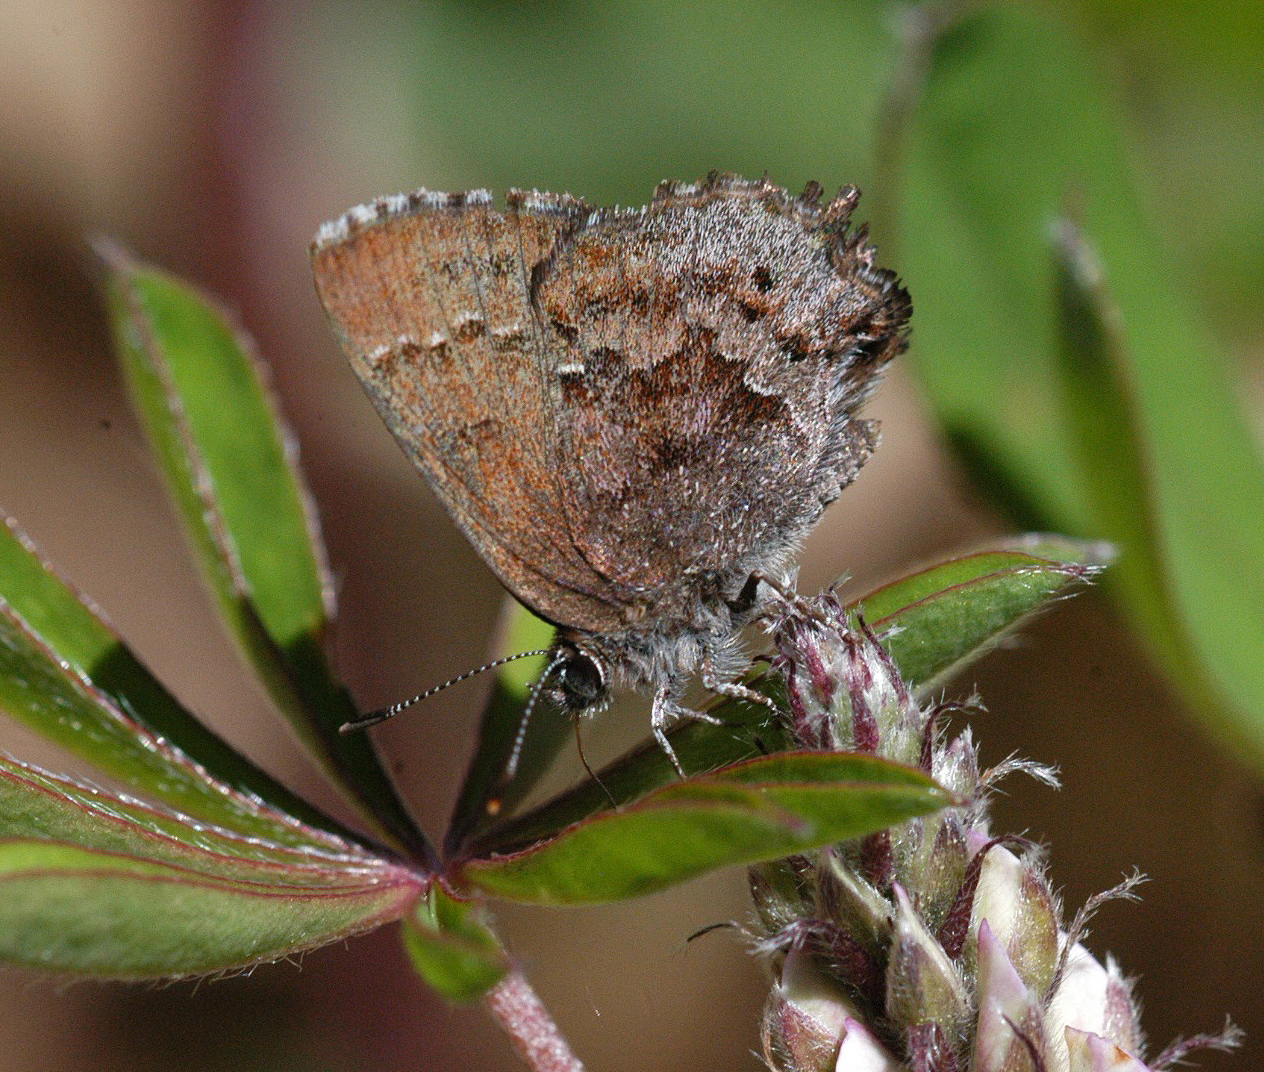 A Frosted Elfin, one of the species studied.